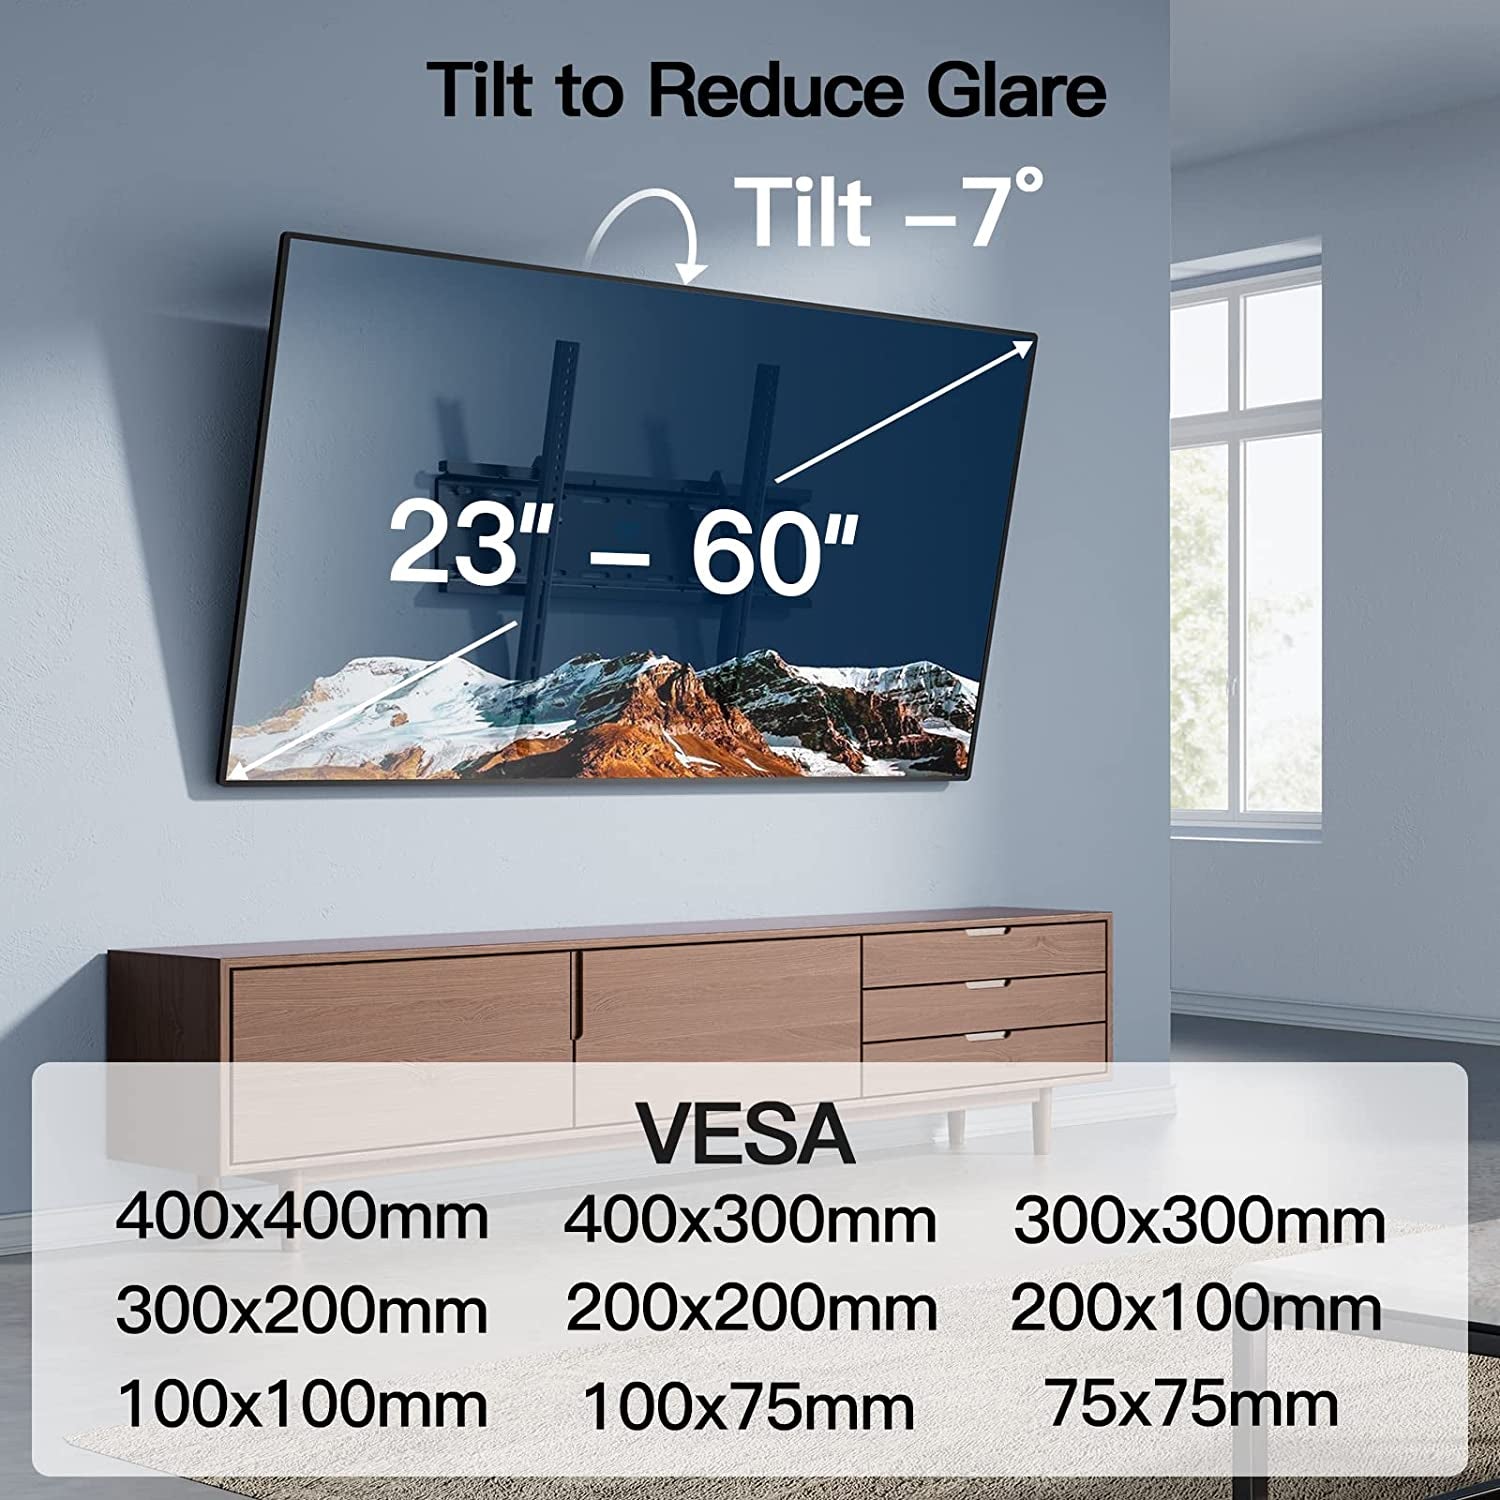 Tilting TV Wall Mount Bracket Low Profile for Most 23-60 Inch LED LCD OLED, Plasma Flat Screen Tvs with VESA 400X400Mm Weight up to 115Lbs, Fits 16" Wood Stud